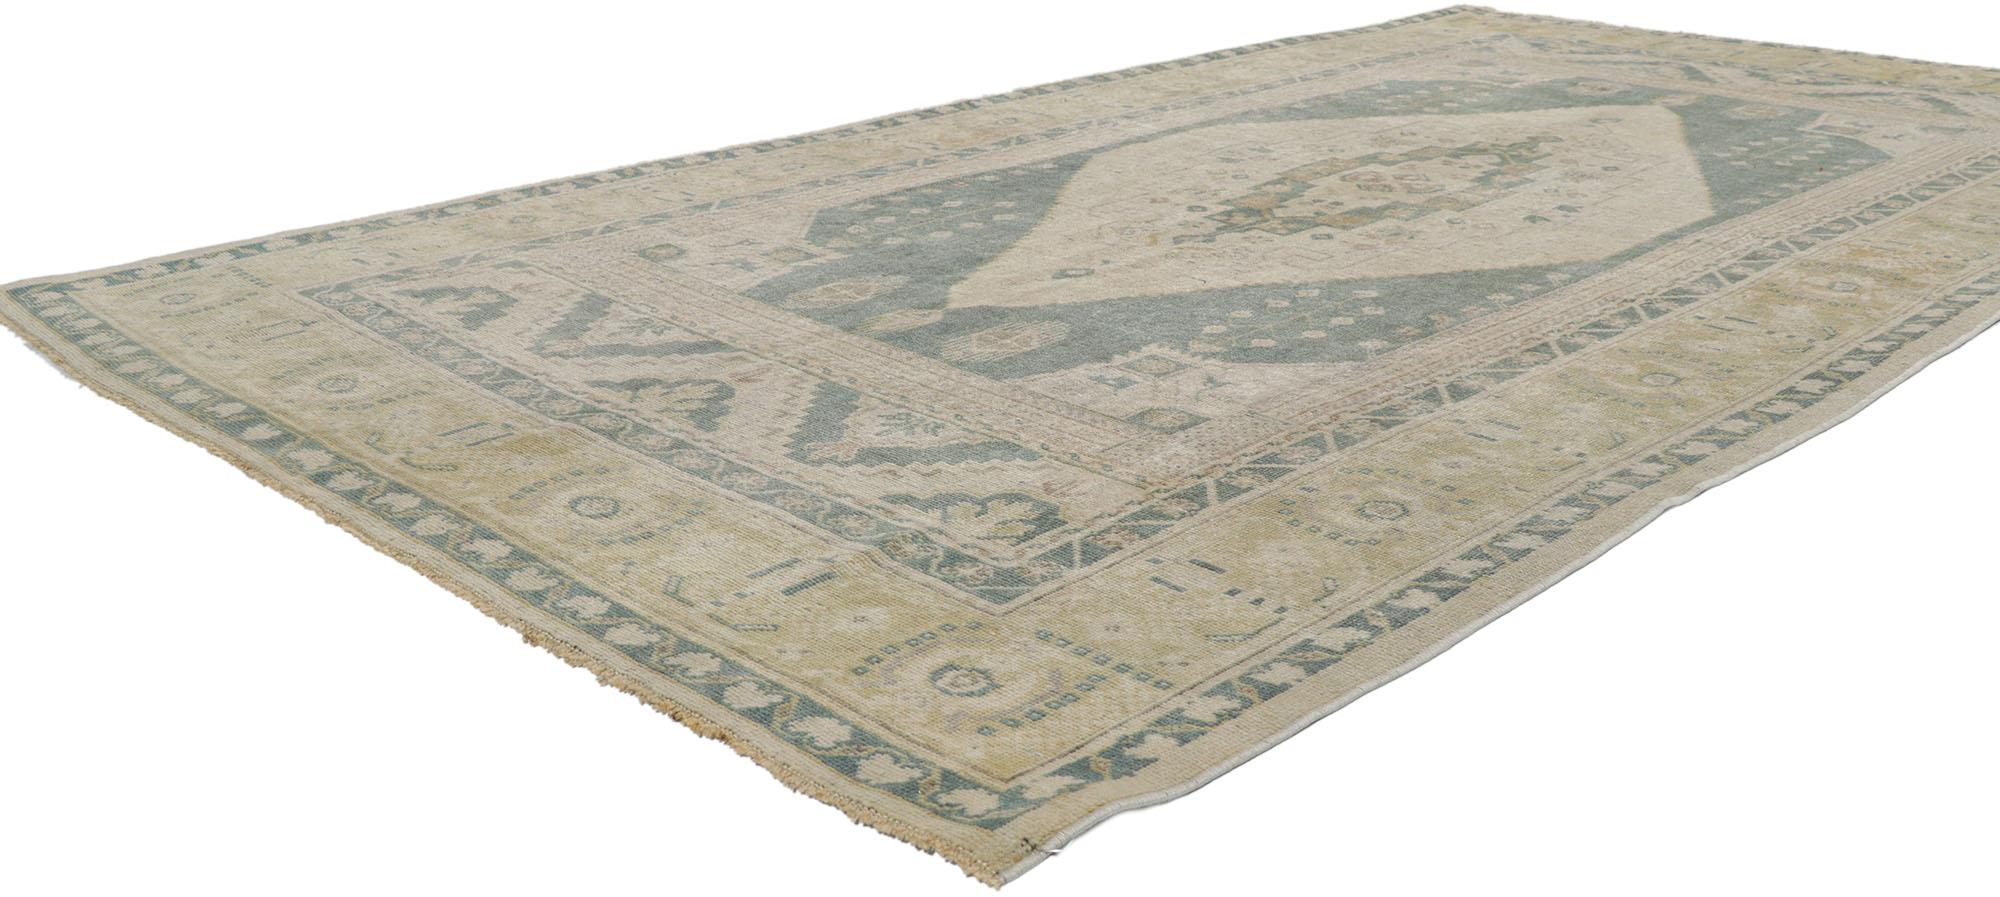 53671 Vintage Turkish Oushak Rug, 05'02 x 09'07. Indulge in the harmonious fusion of Biophilic Design and Shibui aesthetics with this hand-knotted wool vintage Turkish Oushak rug. The antique-washed cut-out field unveils an elongated hexagonal